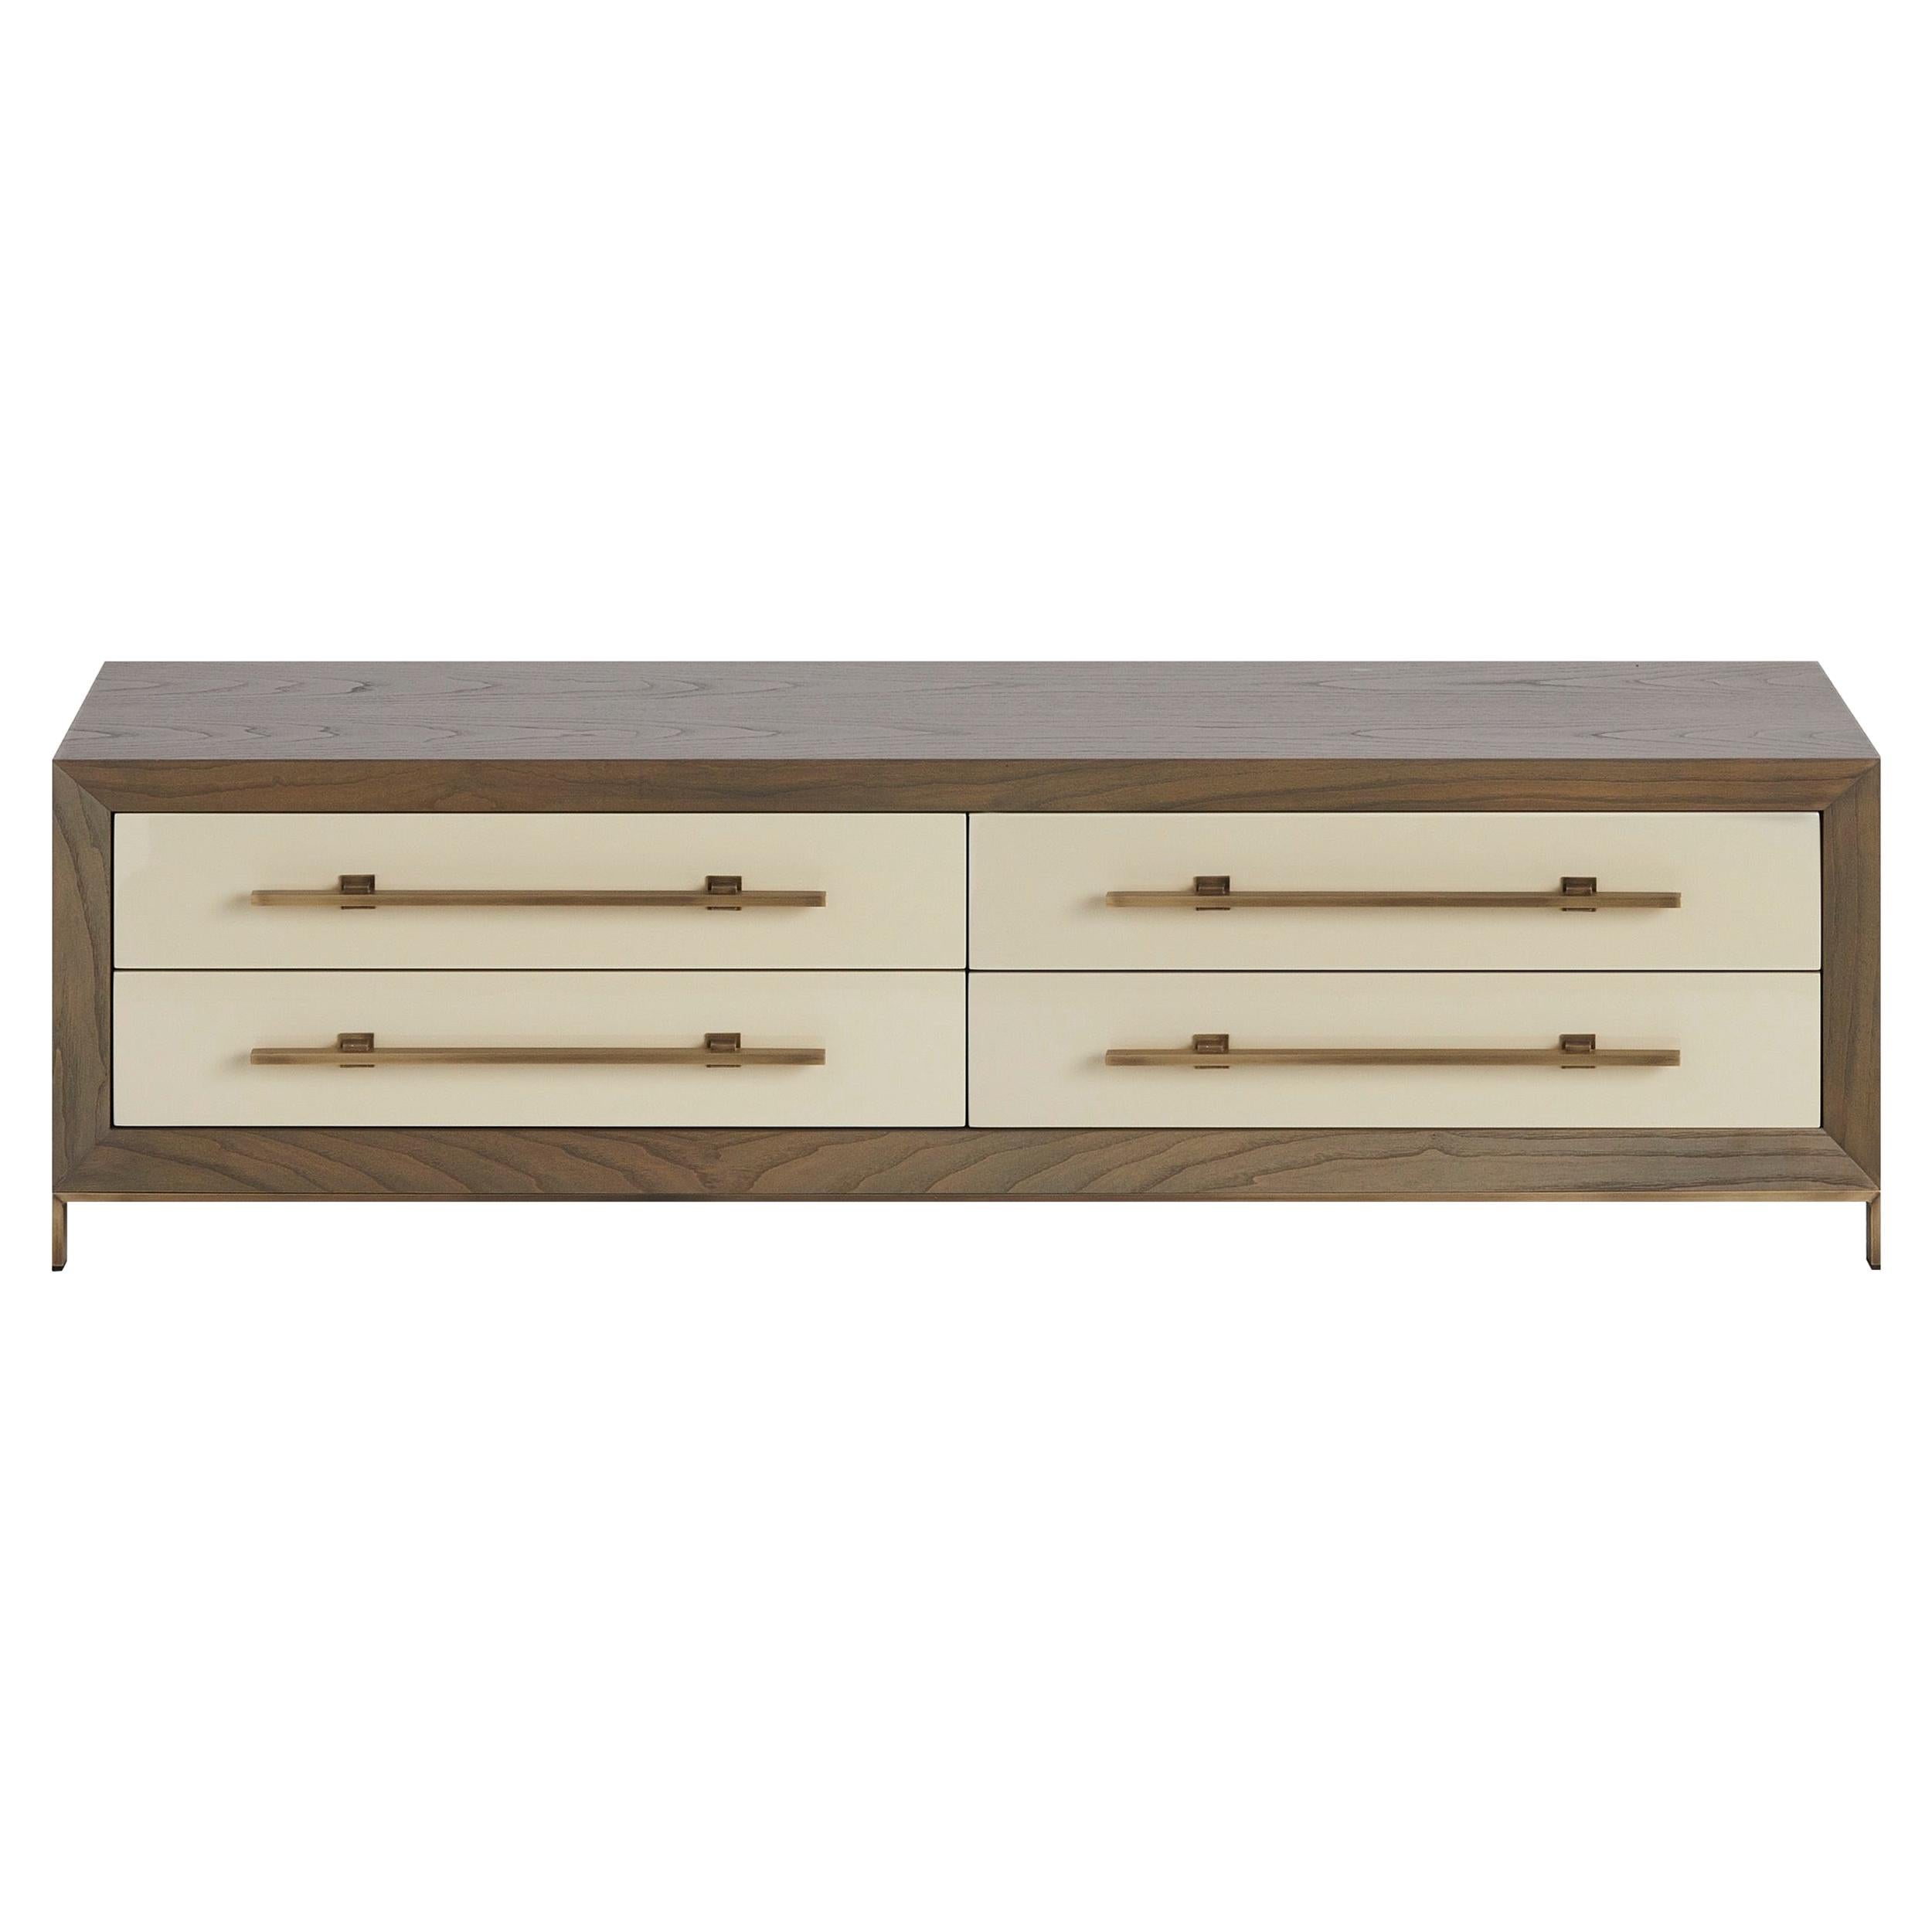 Magna TV sideboard wood with brass handles and feet